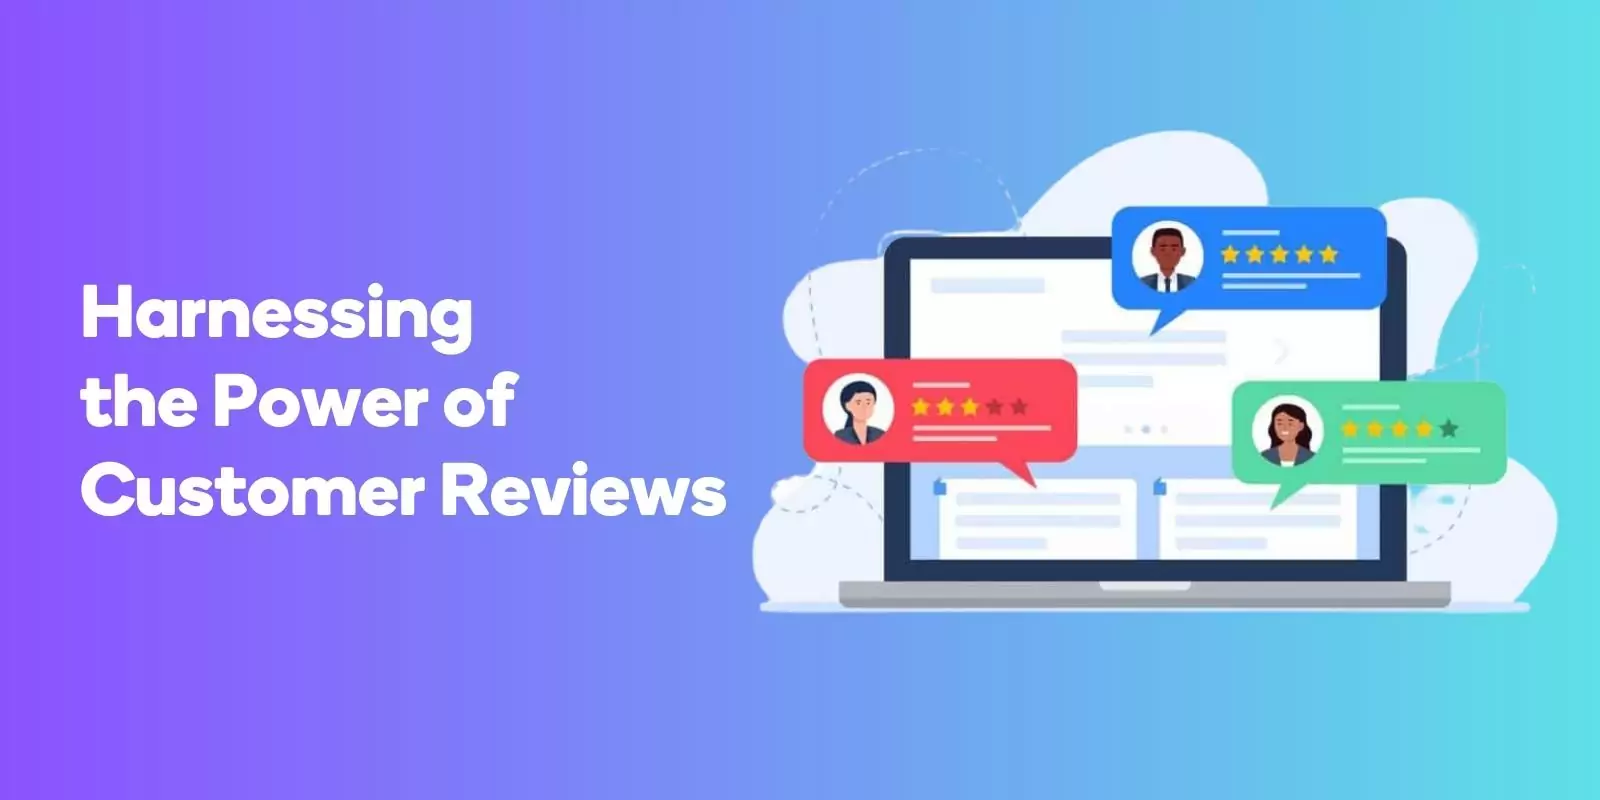 Harnessing the Power of Customer Reviews